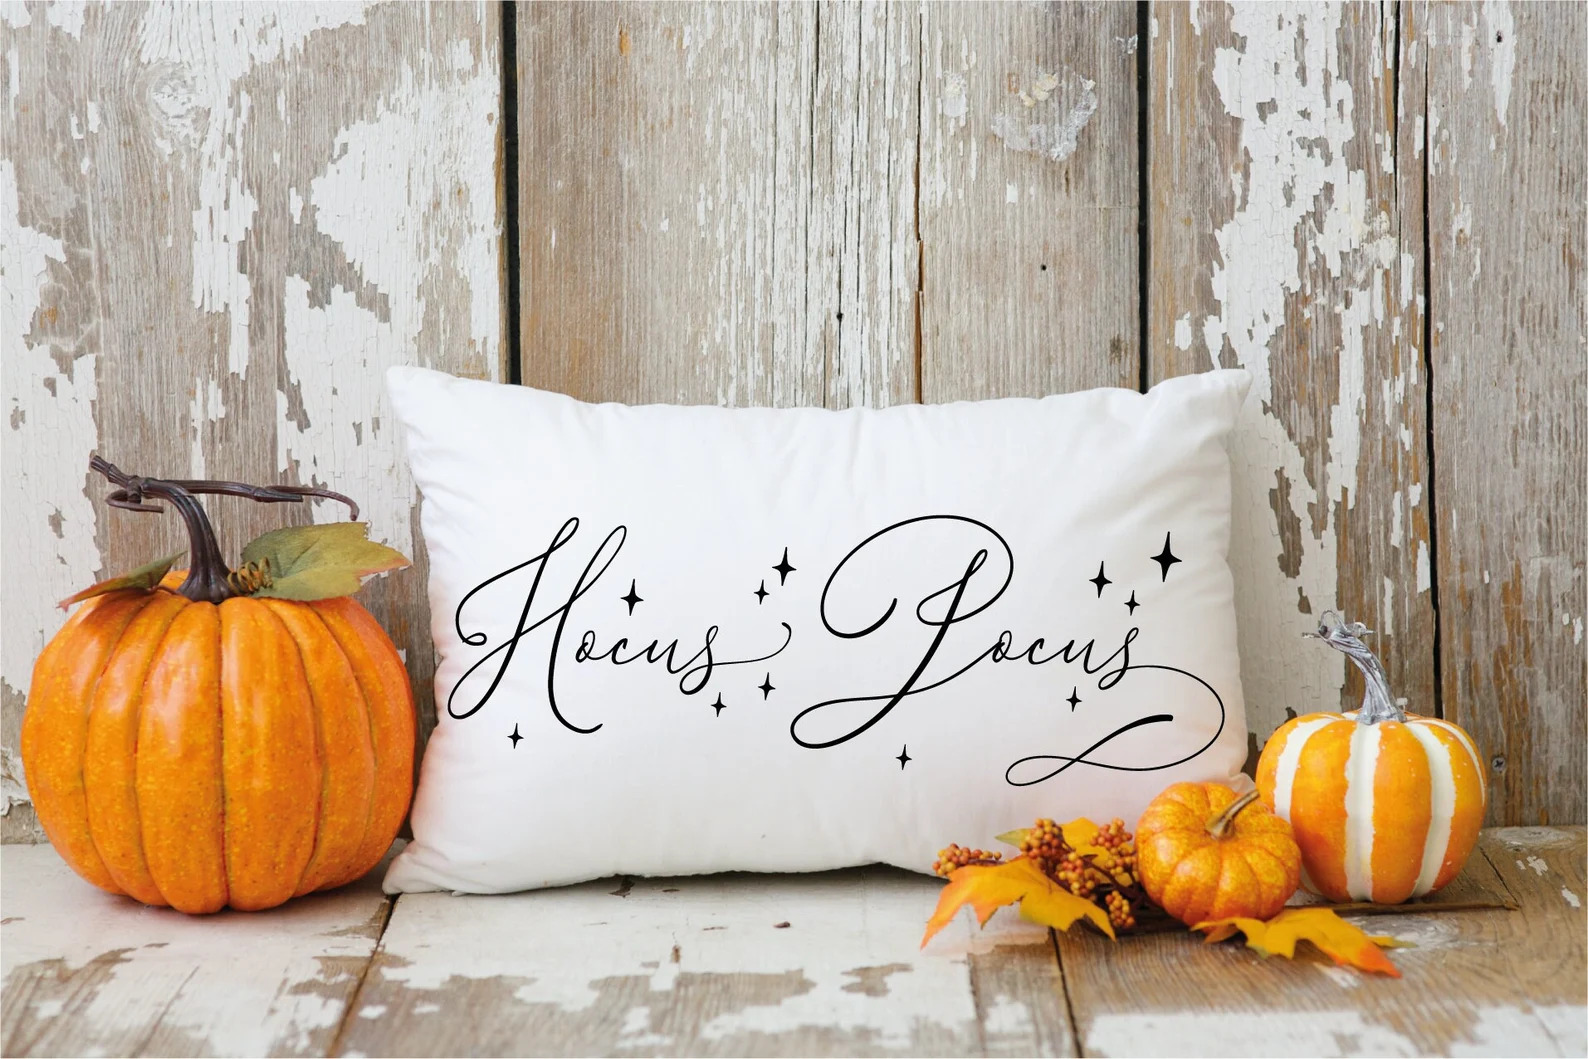 18 Fabulous Halloween Pillow Cover Ideas For Your Last-Minute Touch-up